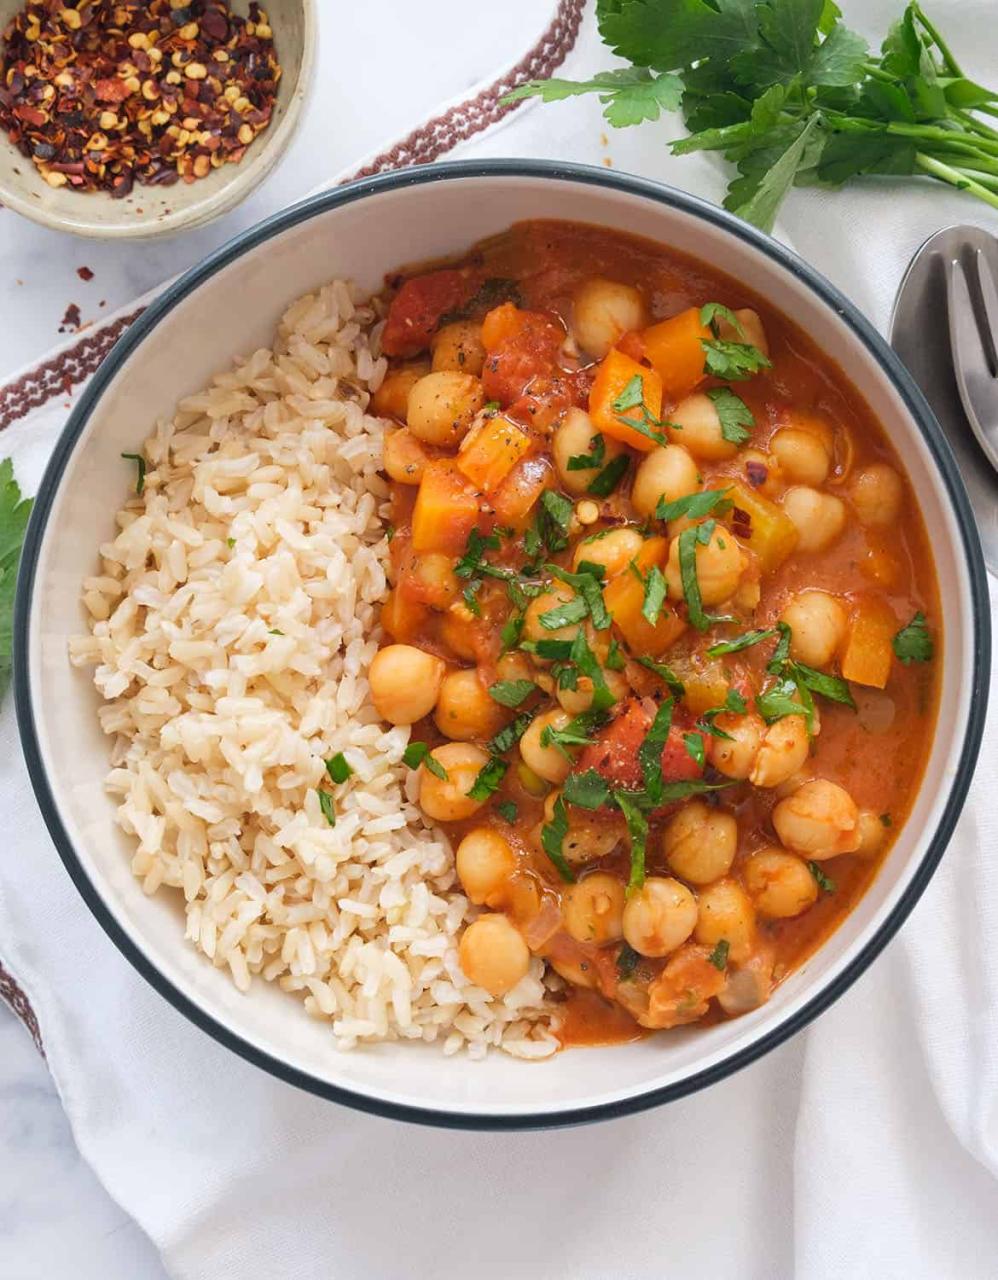 Chickpea Stew - The clever meal